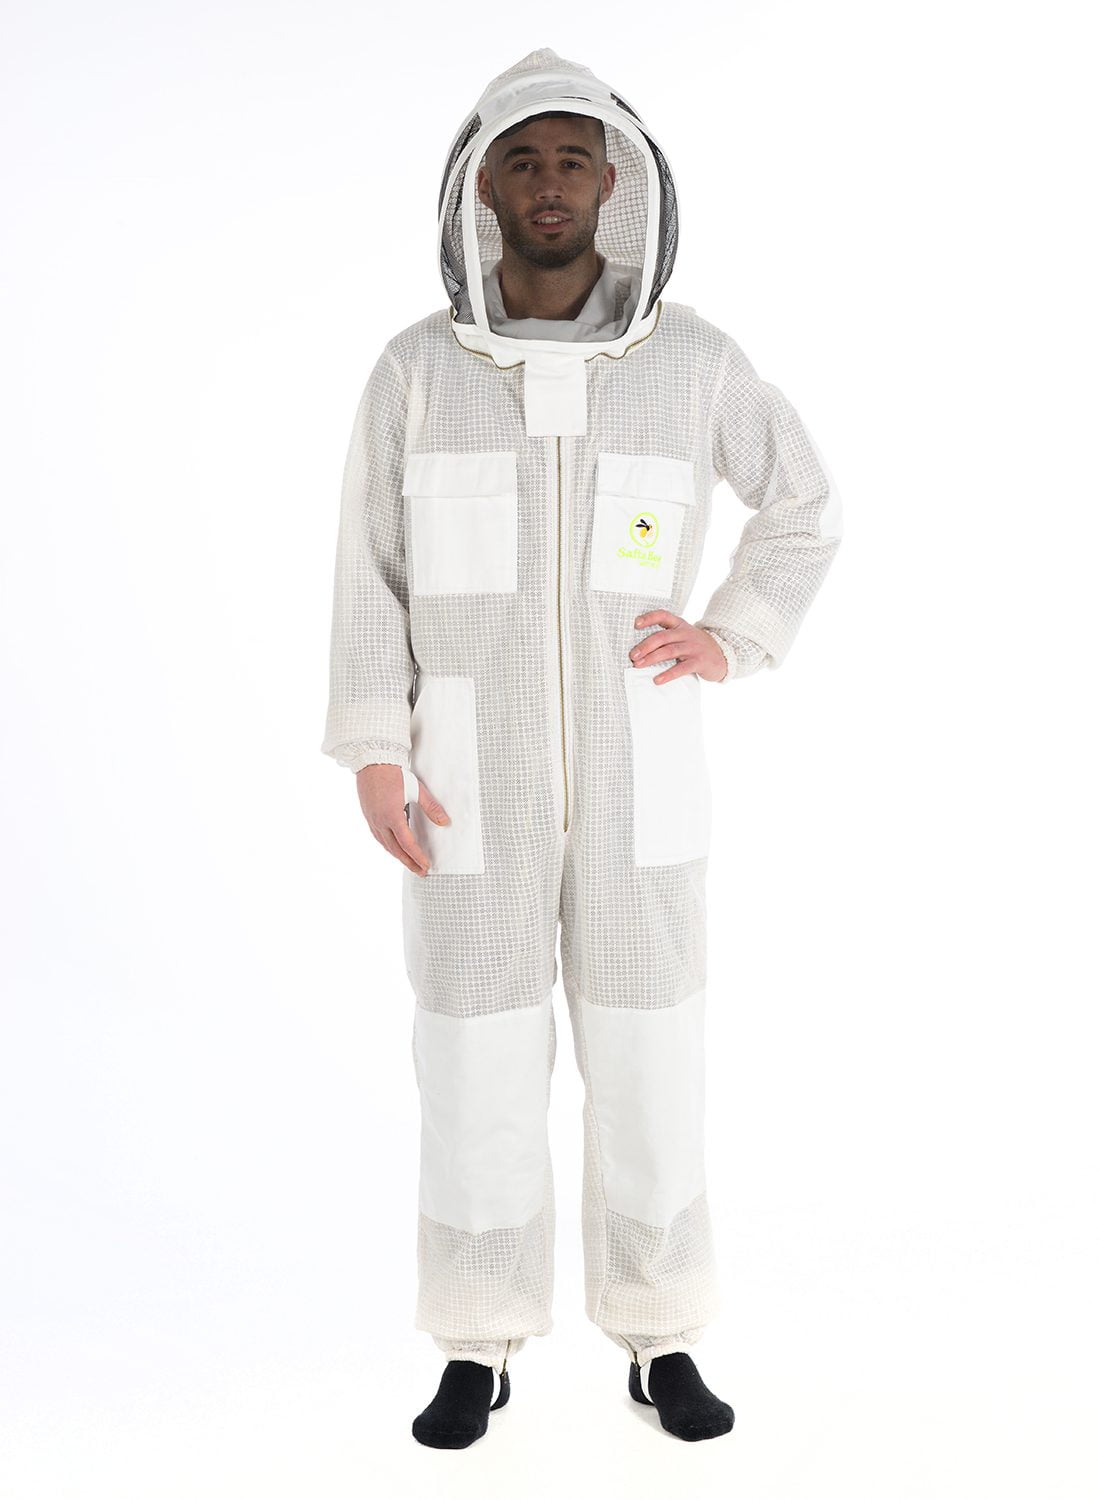 Details about   Pilot Beekeeping Suit Ultra Ventilated 3 Layers Extra Ordinary Features Size XL 